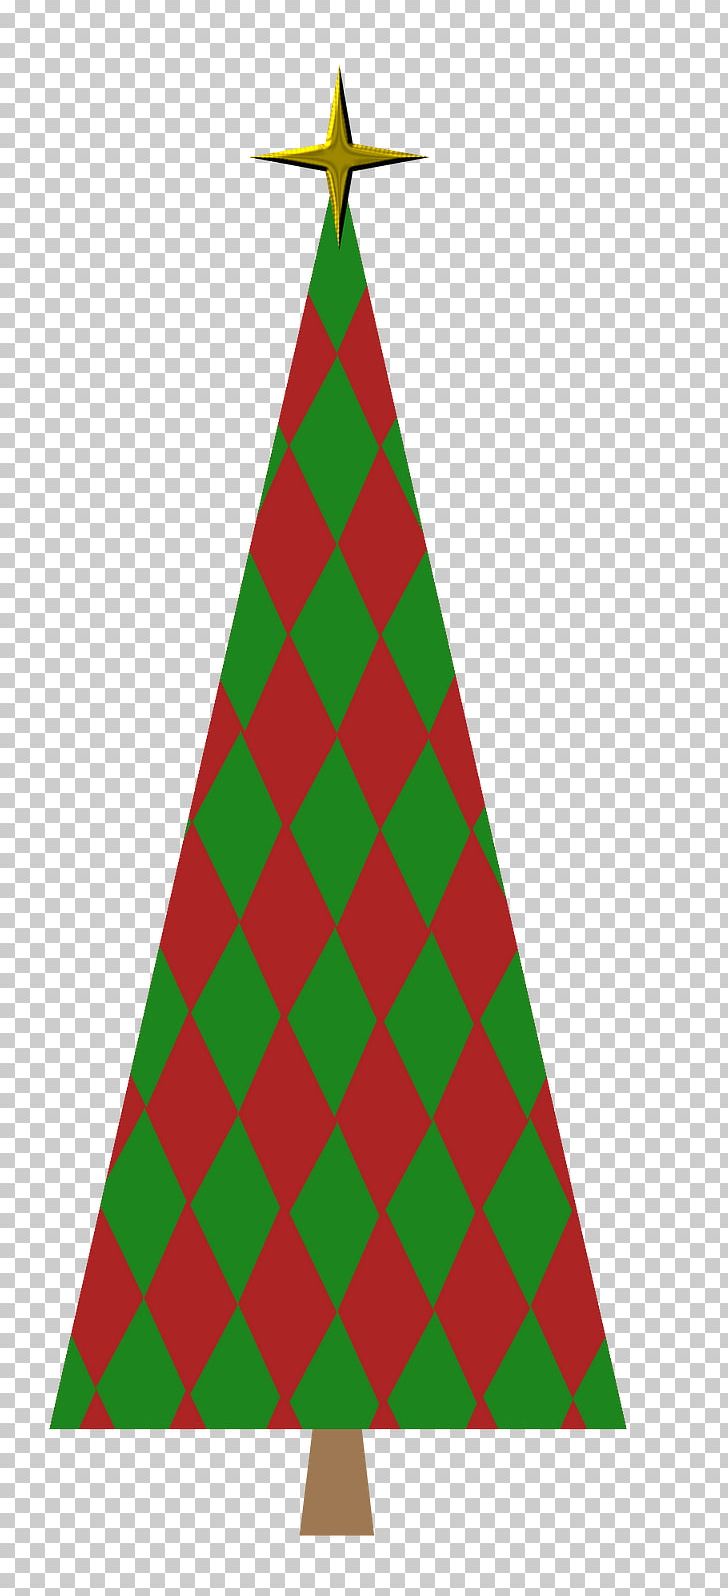 Paper Clip Christmas Tree PNG, Clipart, Angle, Birthday, Box, Bundle, Christmas Free PNG Download